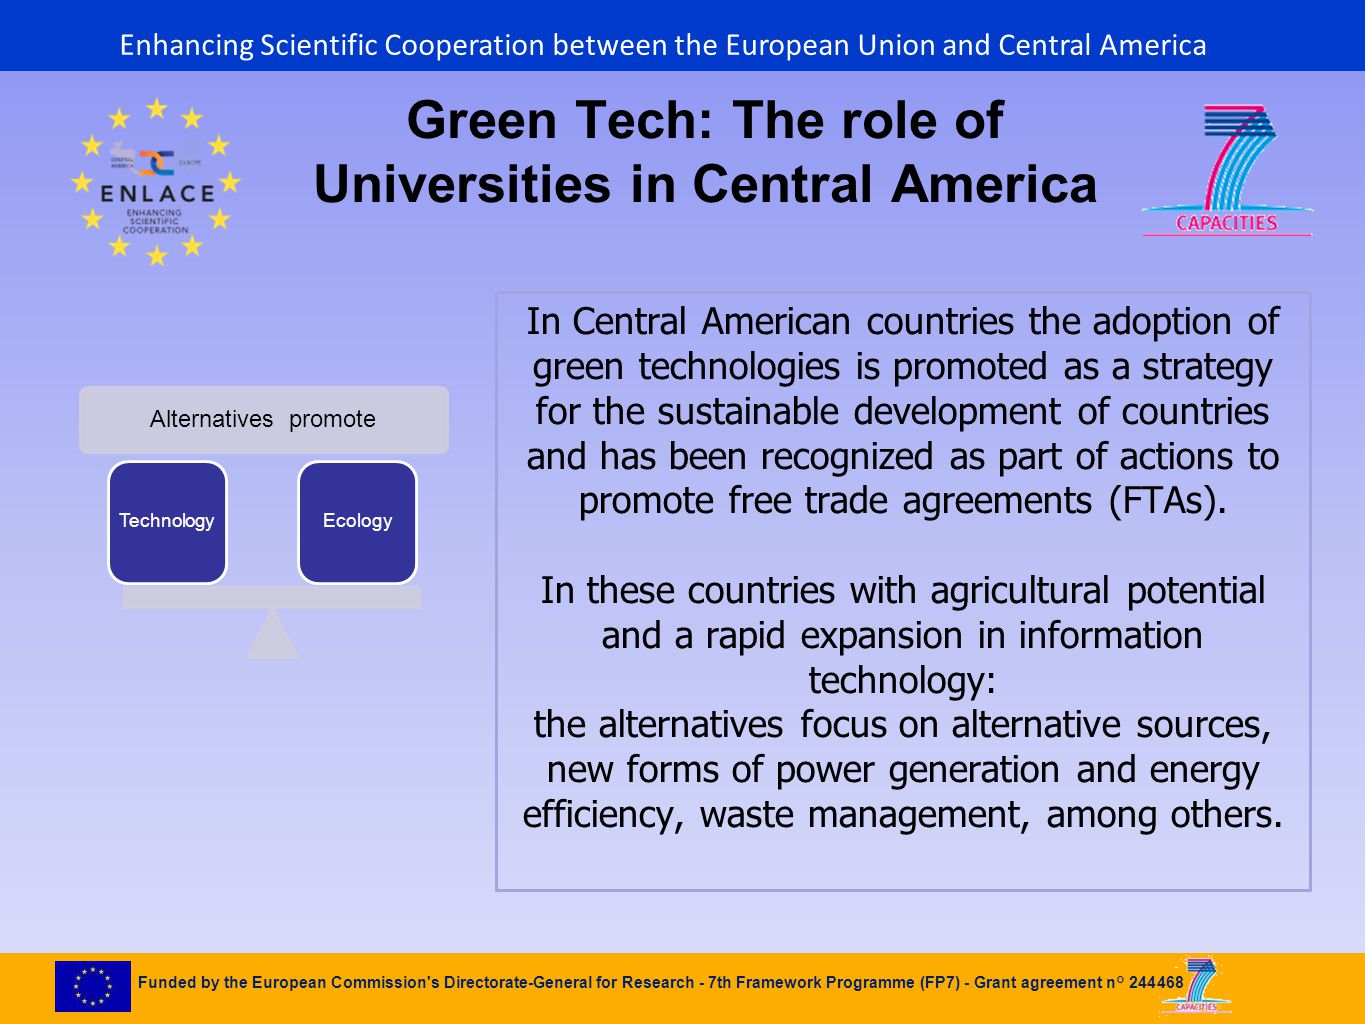 Funded by the European Commission s Directorate-General for Research - 7th Framework Programme (FP7) - Grant agreement n° Alternatives promote TechnologyEcology Green Tech: The role of Universities in Central America In Central American countries the adoption of green technologies is promoted as a strategy for the sustainable development of countries and has been recognized as part of actions to promote free trade agreements (FTAs).